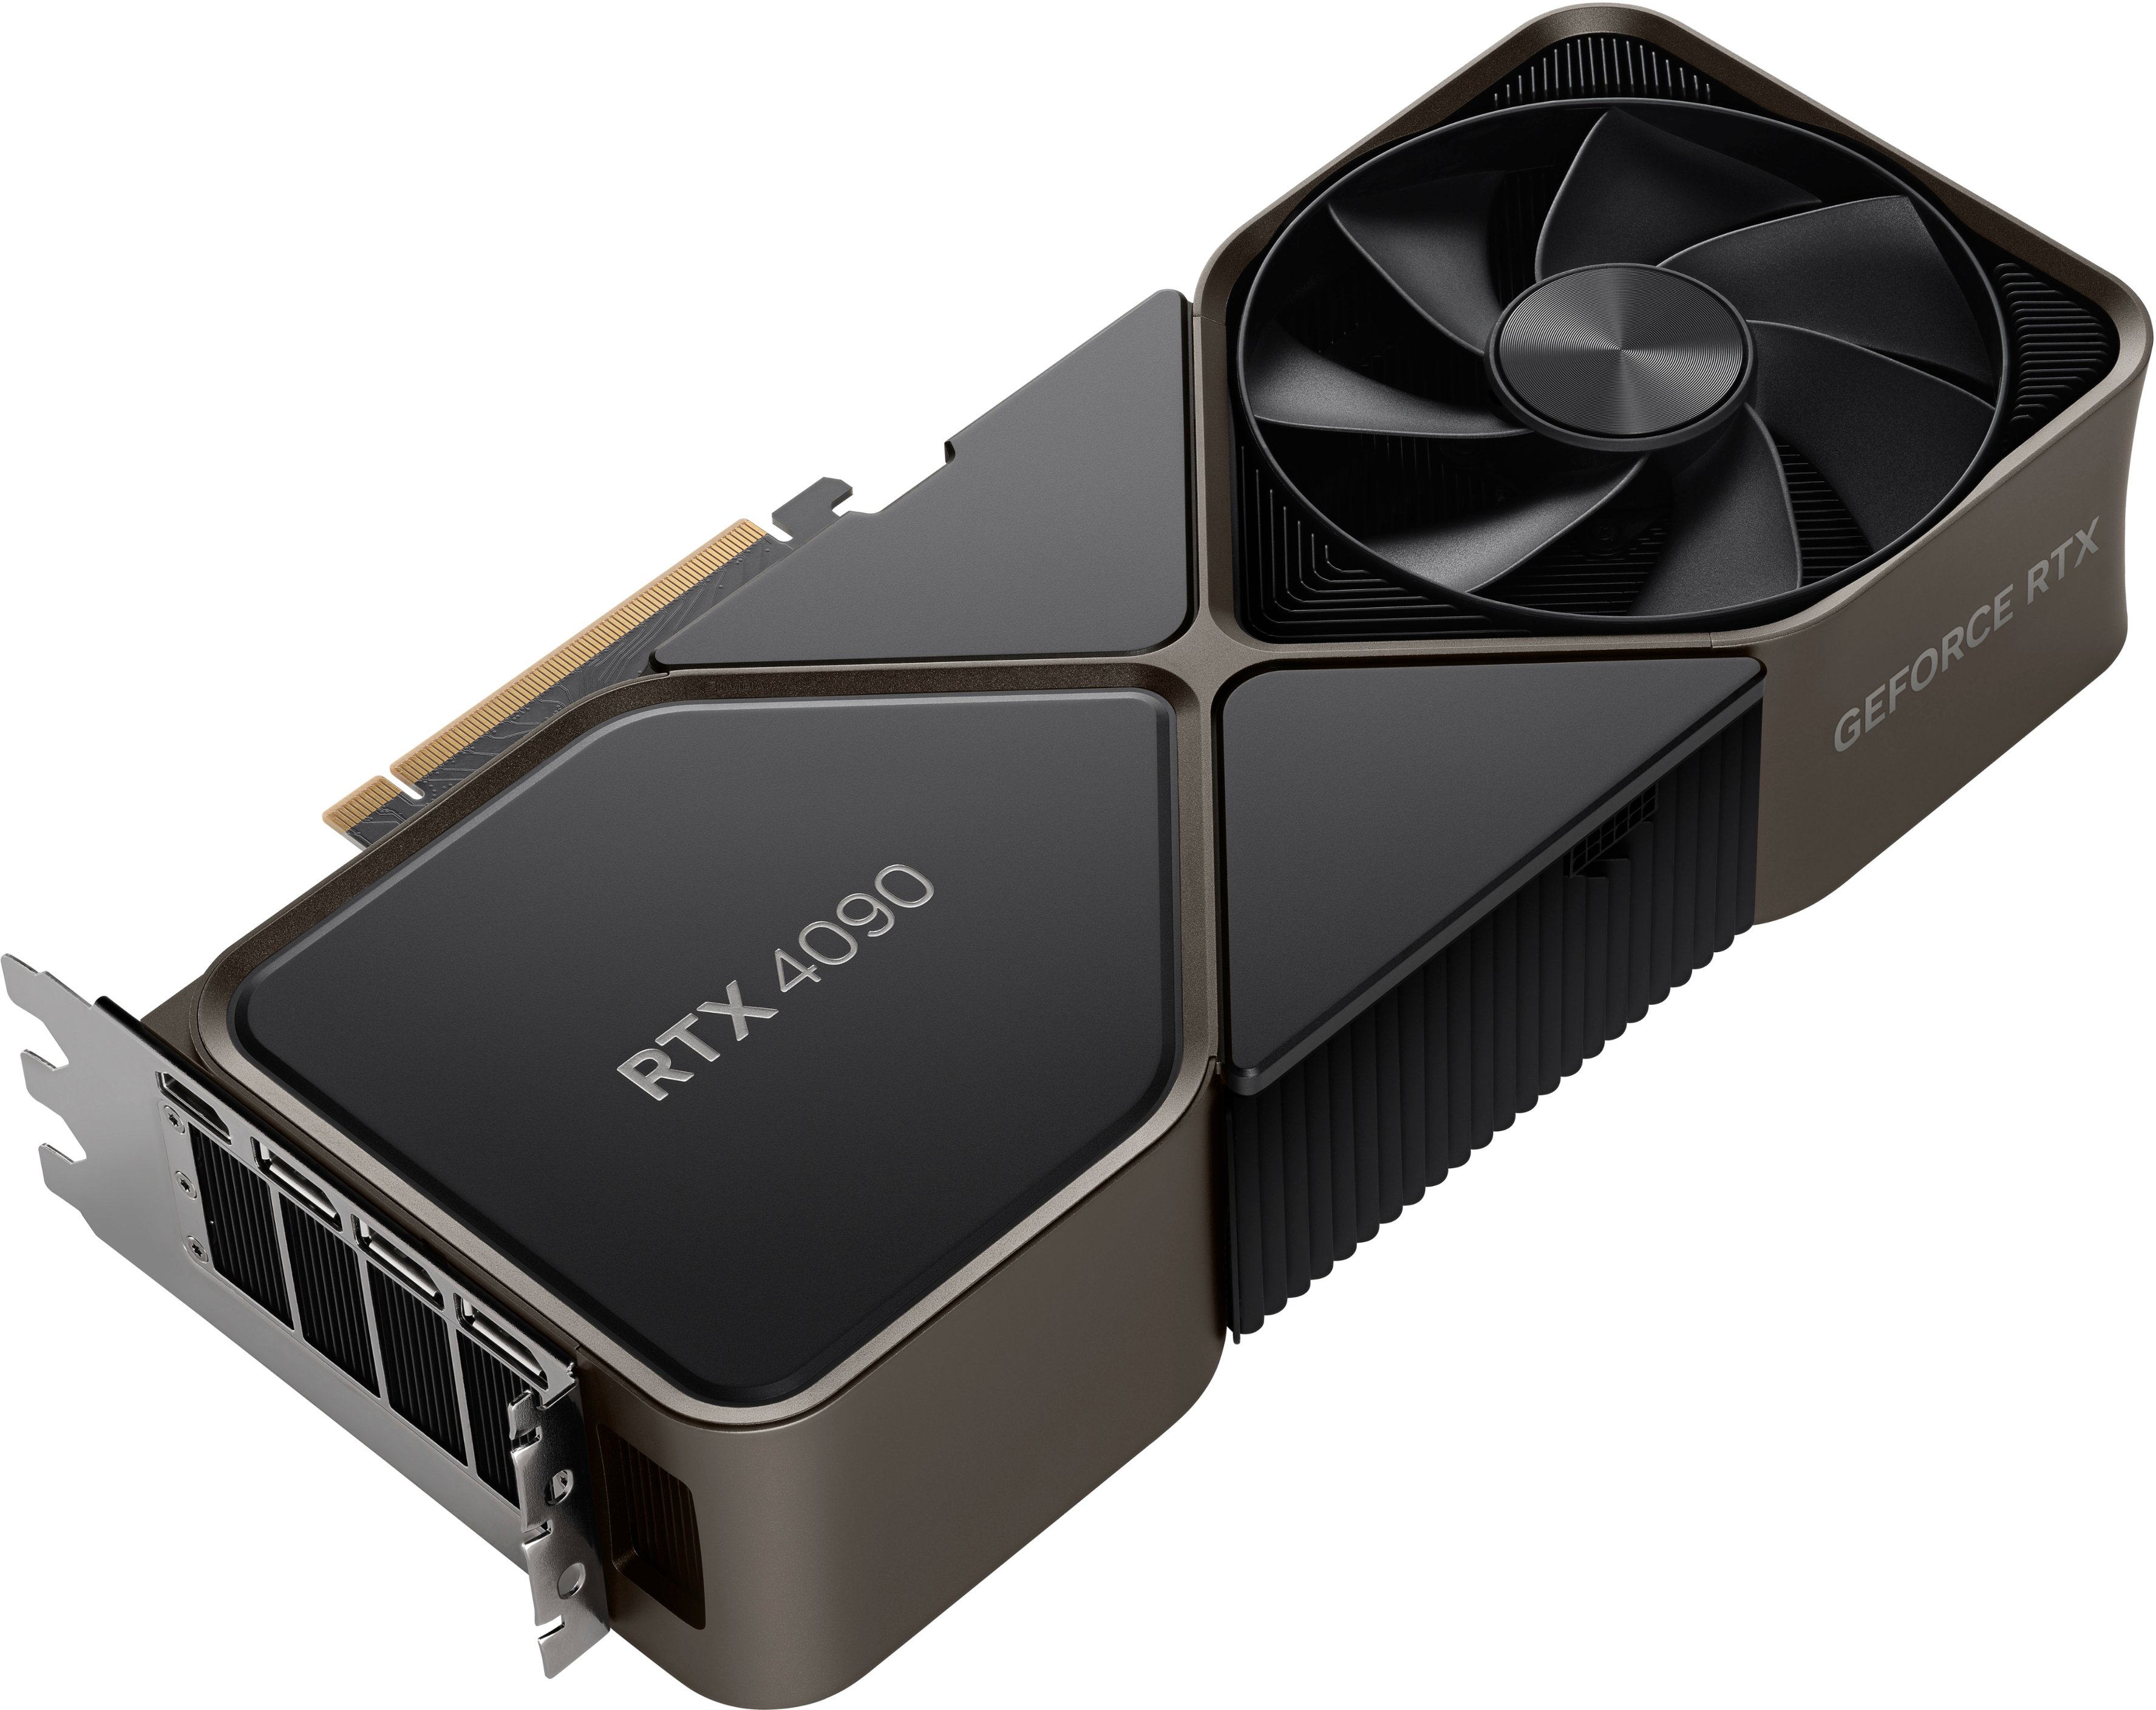 Nvidia reportedly preparing RTX 4090 Ti cards with up to 20% increased  performance over the RTX 4090 : r/hardware